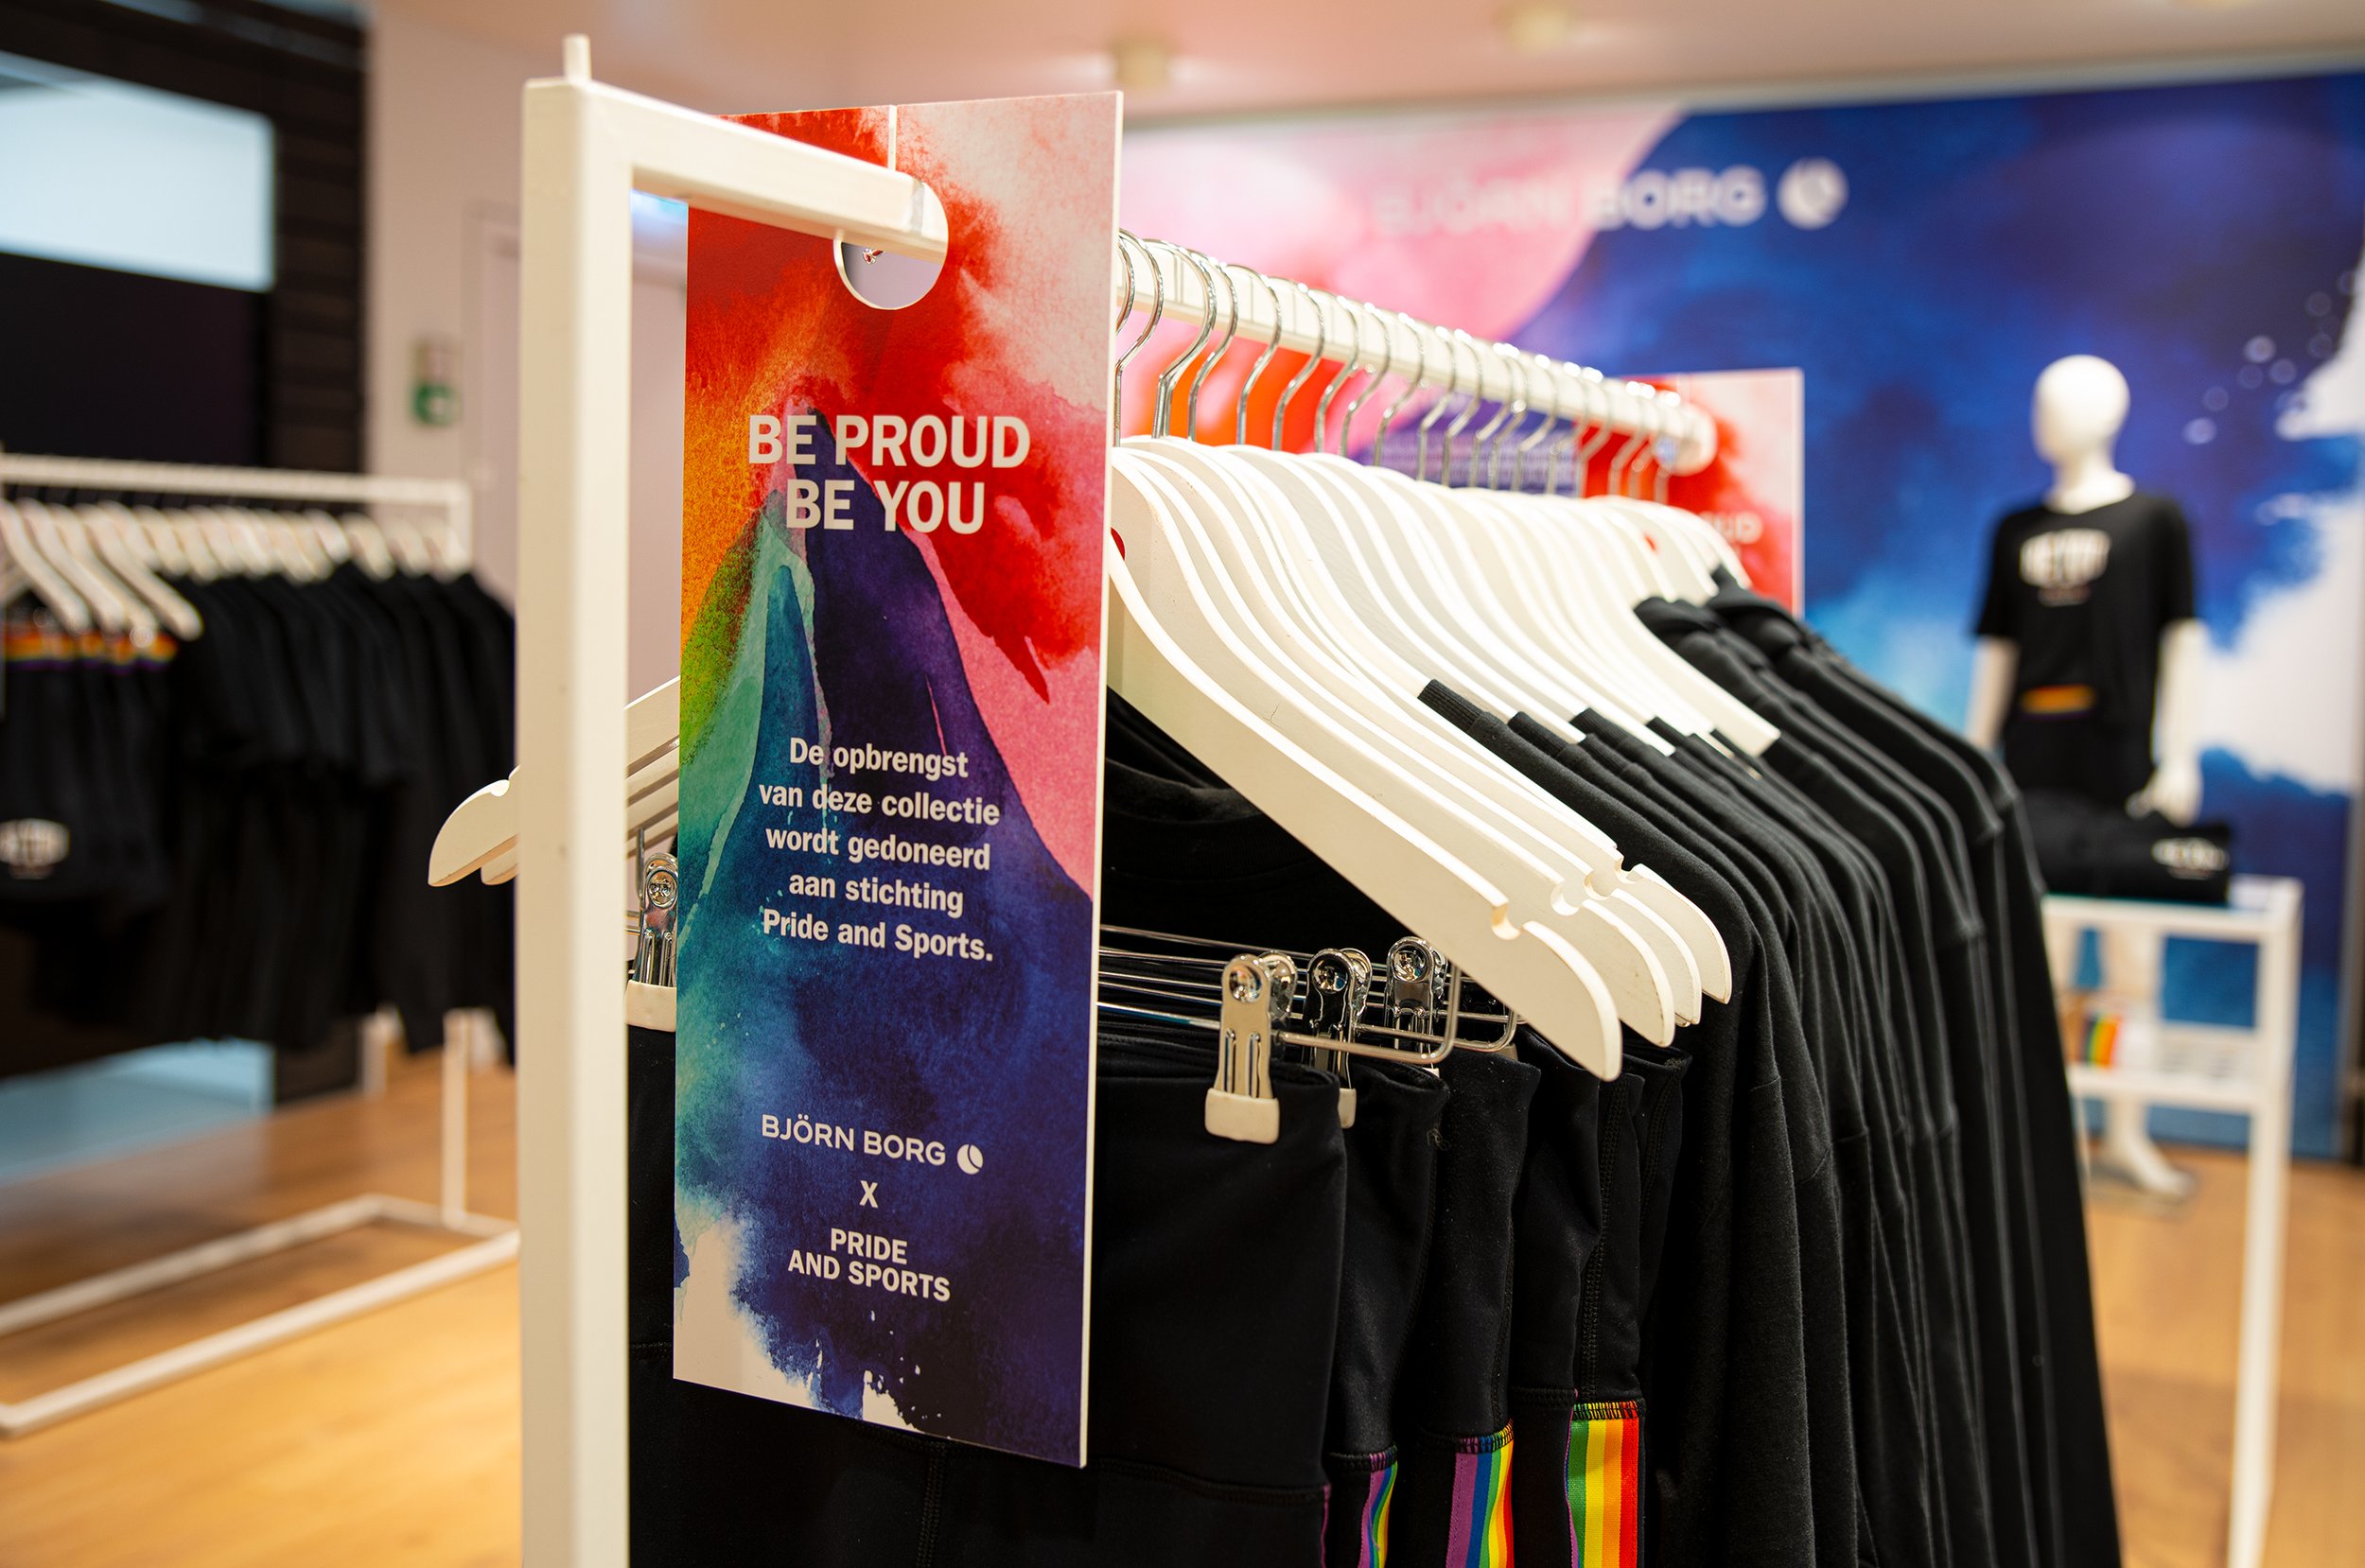 Oy designed and produced physical in-store promotional materials to decorate stores — oy